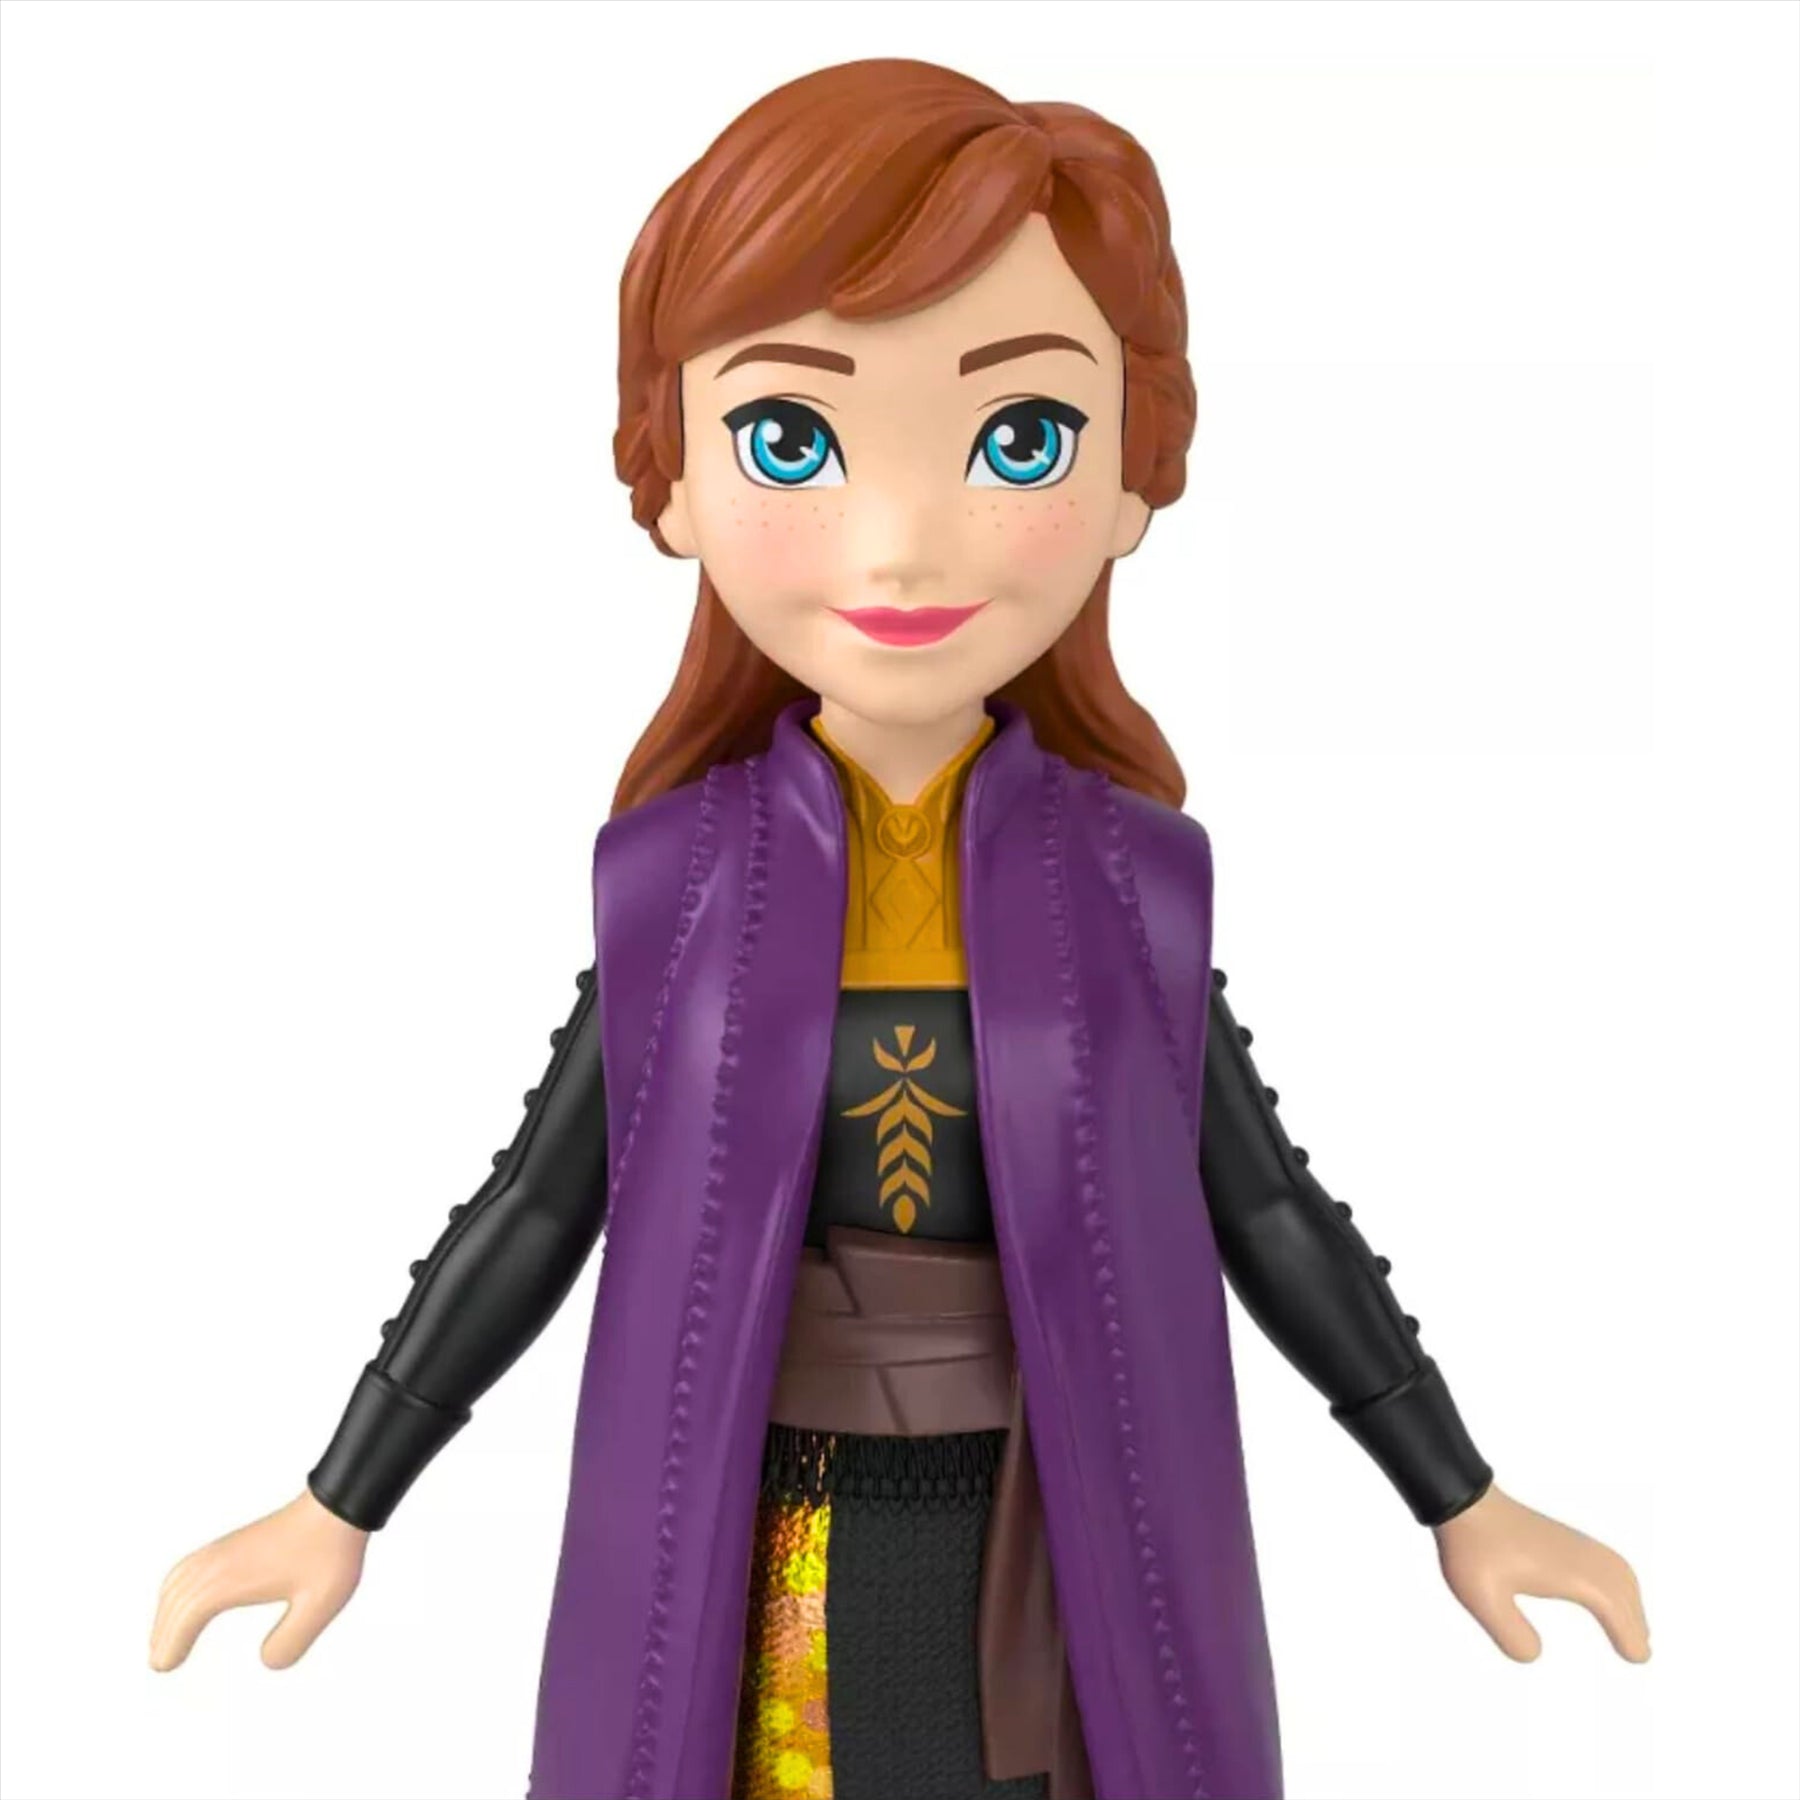 Disney Frozen Anna 10cm Articulated Action Figure Play Toy - Toptoys2u